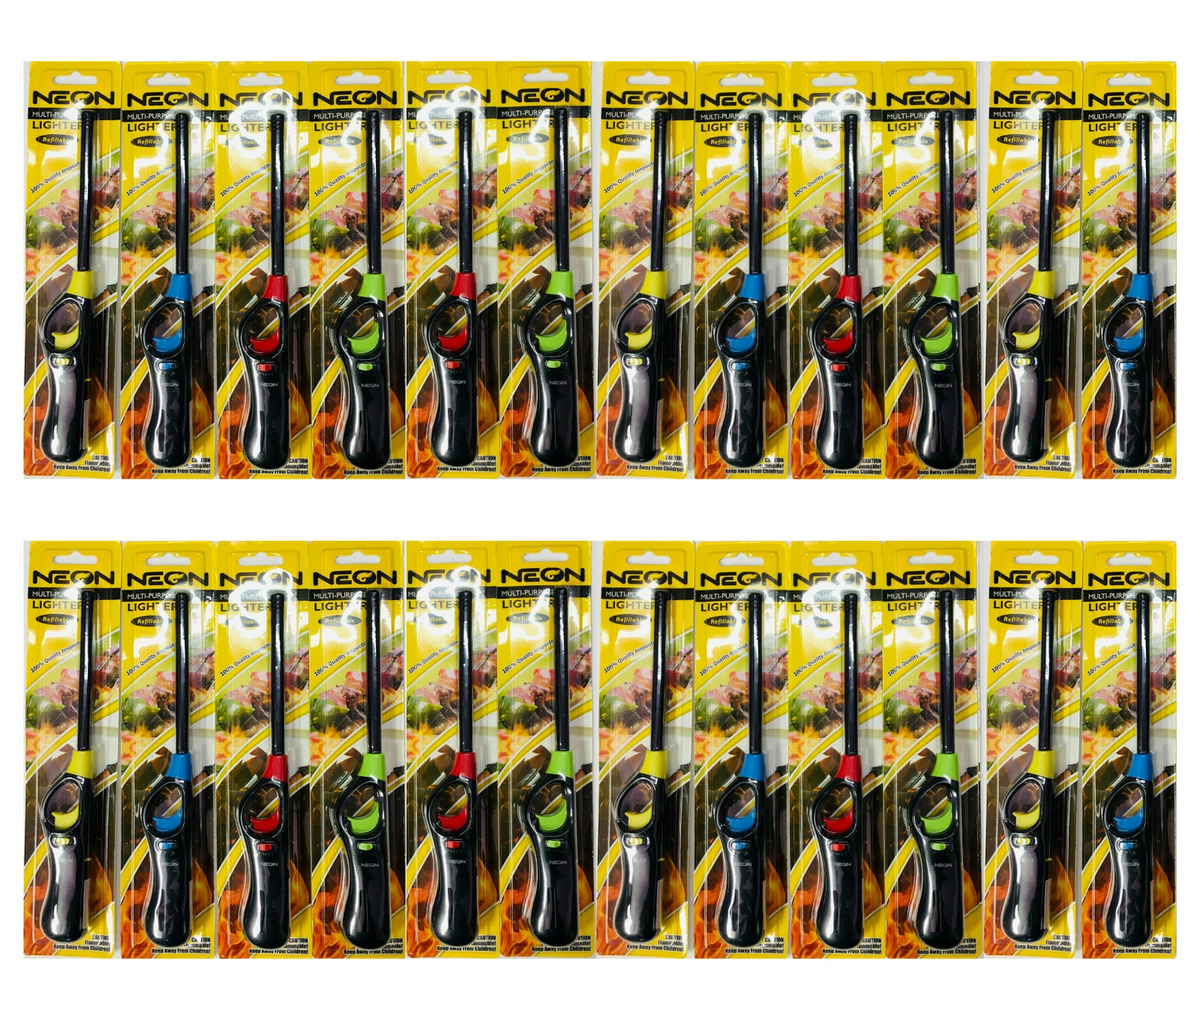 Neon Multi-purpose Refillable Lighters Fireplace Grill Gas Stove BBQ (24 Packs)